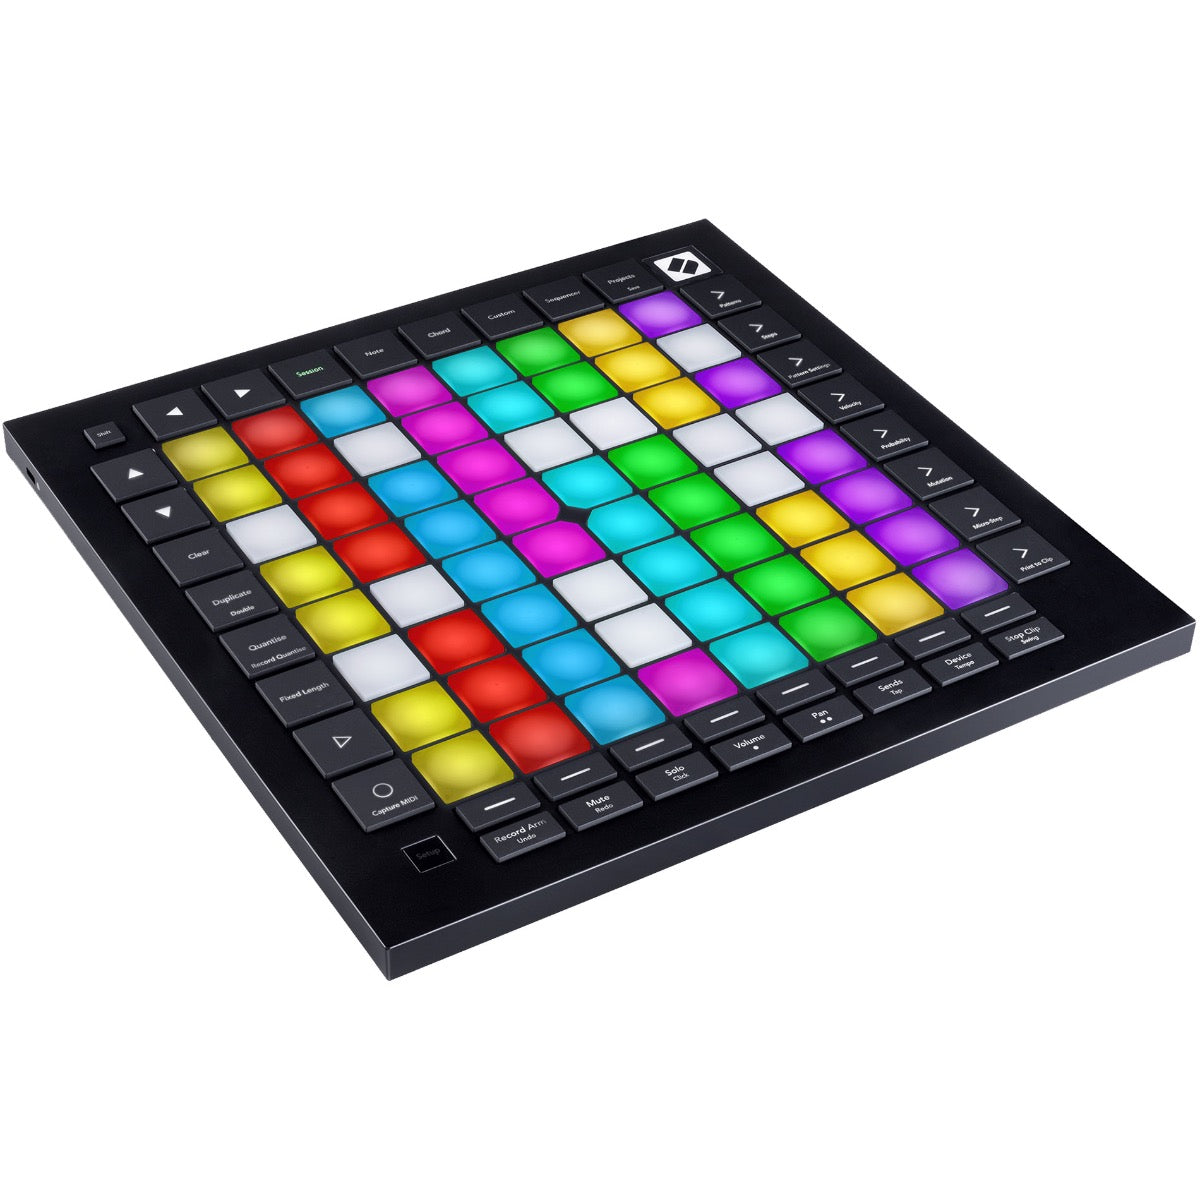 3/4 view of Novation Launchpad Pro MK3 Grid Controller for Ableton Live showing top, front and left side